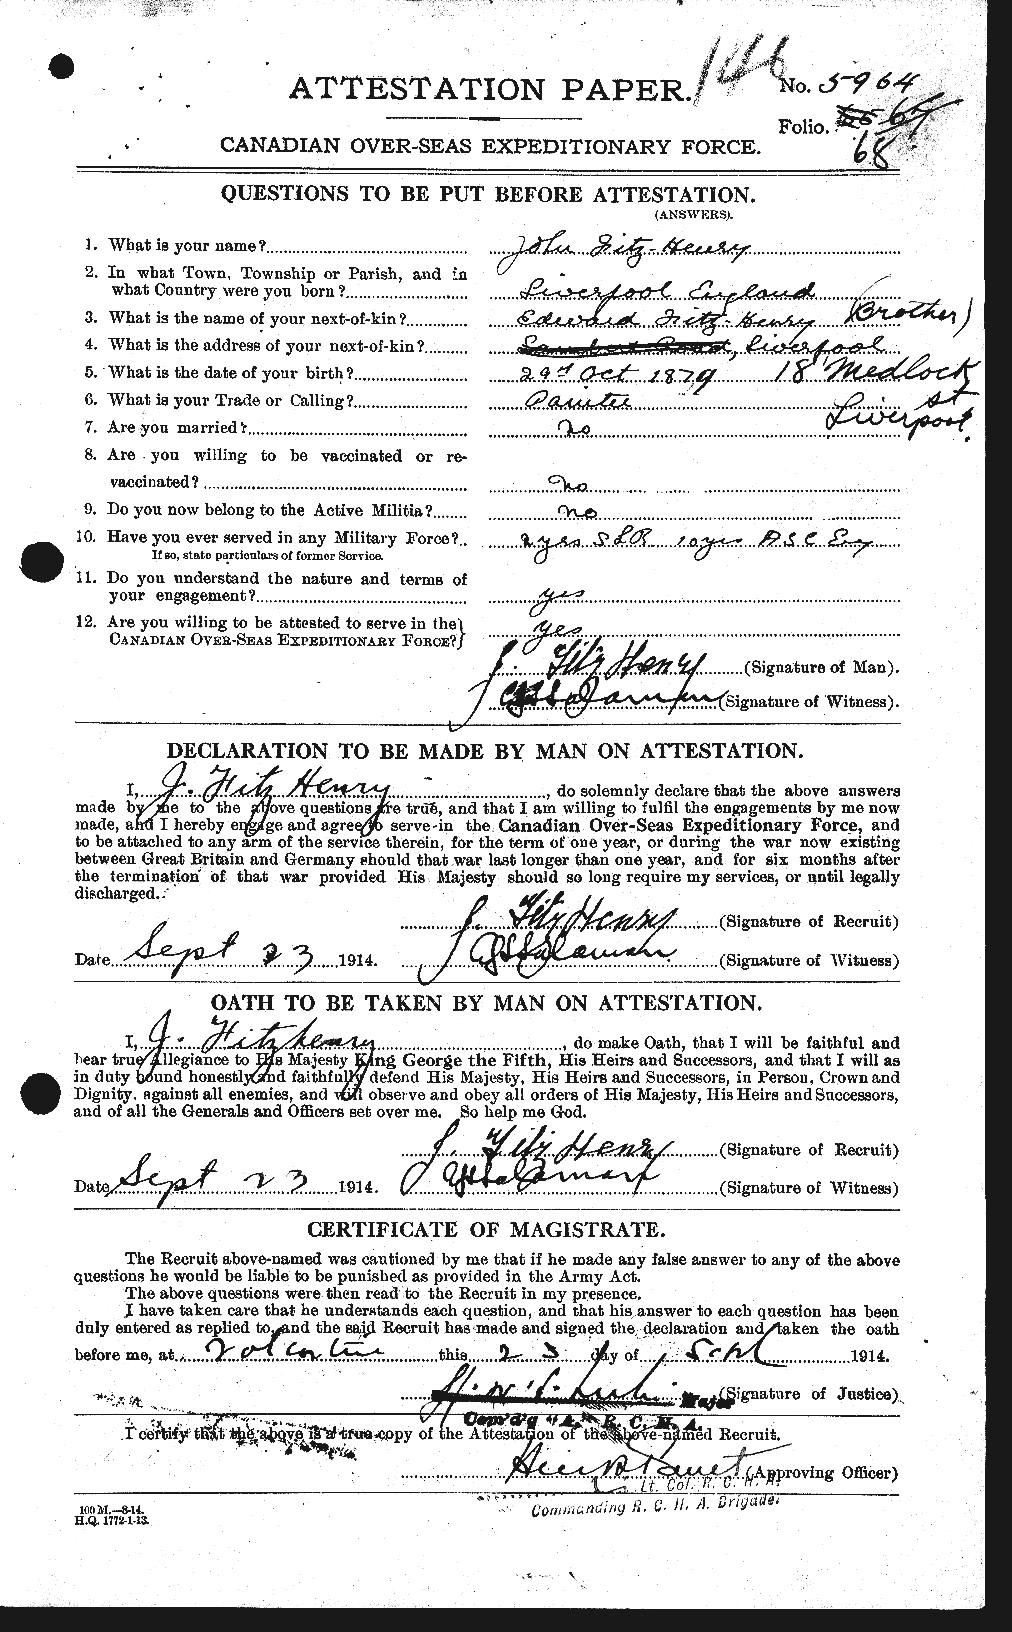 Personnel Records of the First World War - CEF 326720a